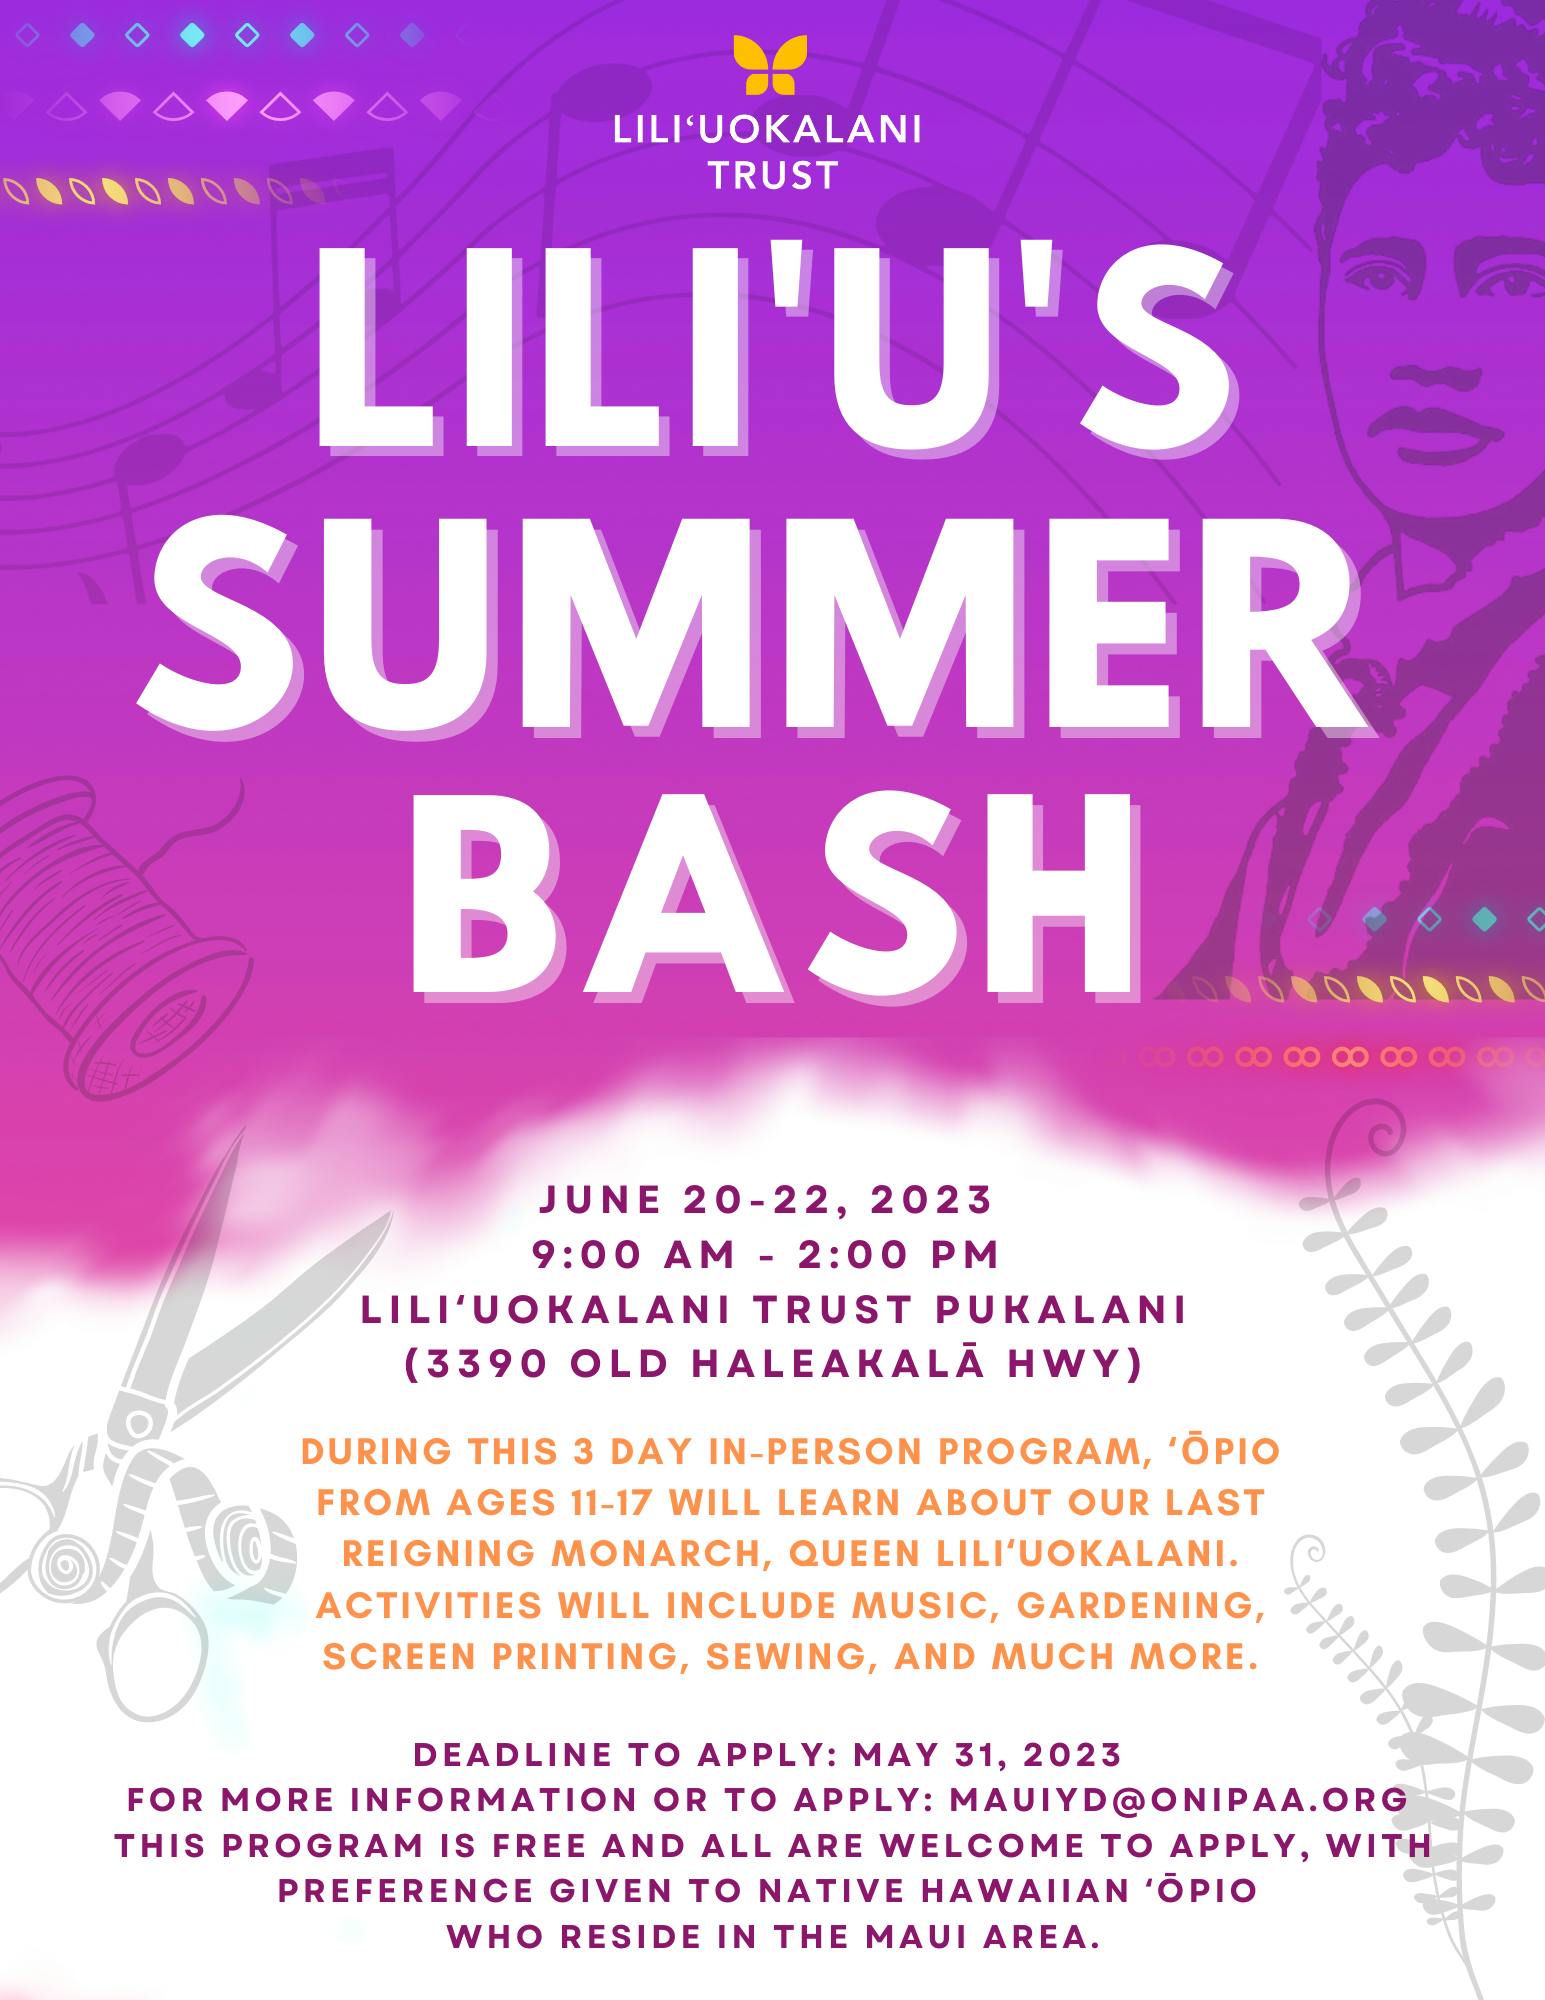 Flyer for Liliʻuʻs Summer Bash, a 3 day in-person program, ʻōpio from ages 11-17 will learn about our last reigning monarch, Queen Liliʻuokalani. Activities will include music, gardening, screen printing sewing and much more.